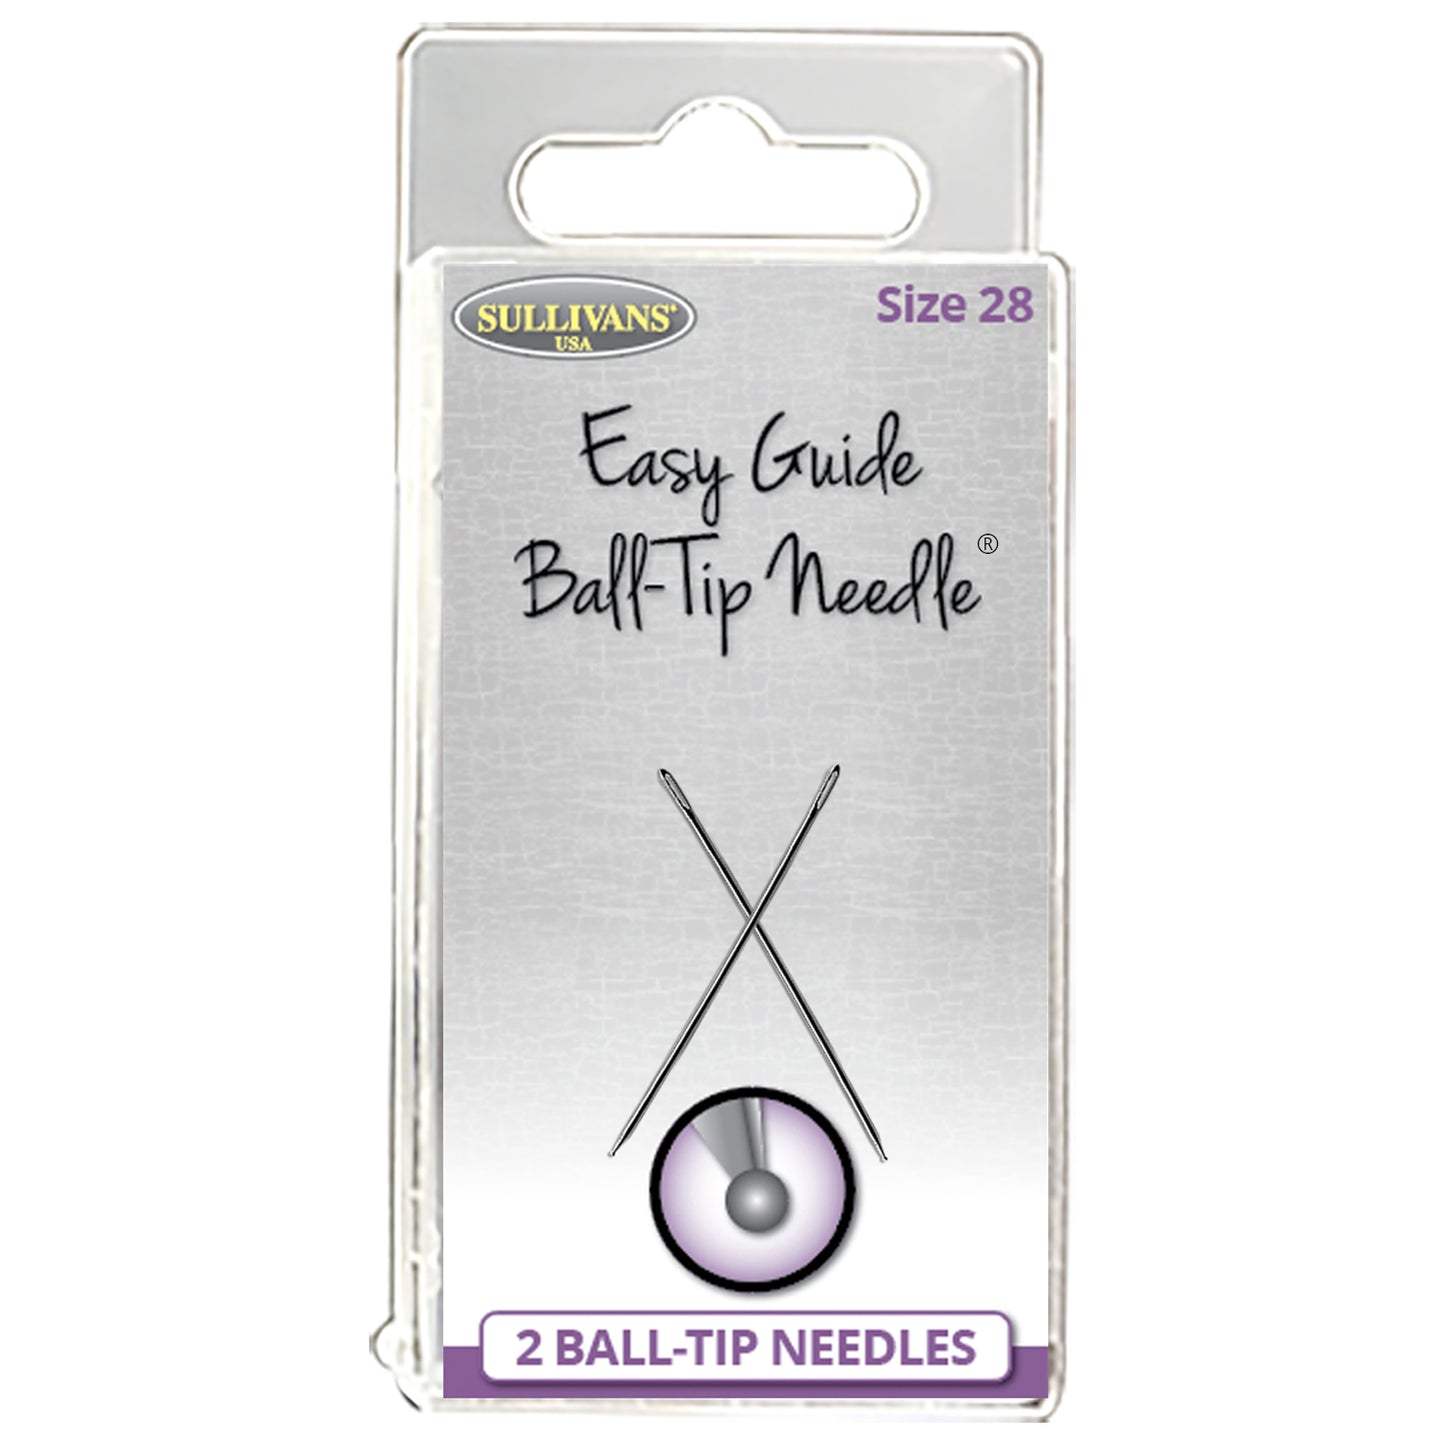 Easy Guide Ball-Tip Needles - size 28